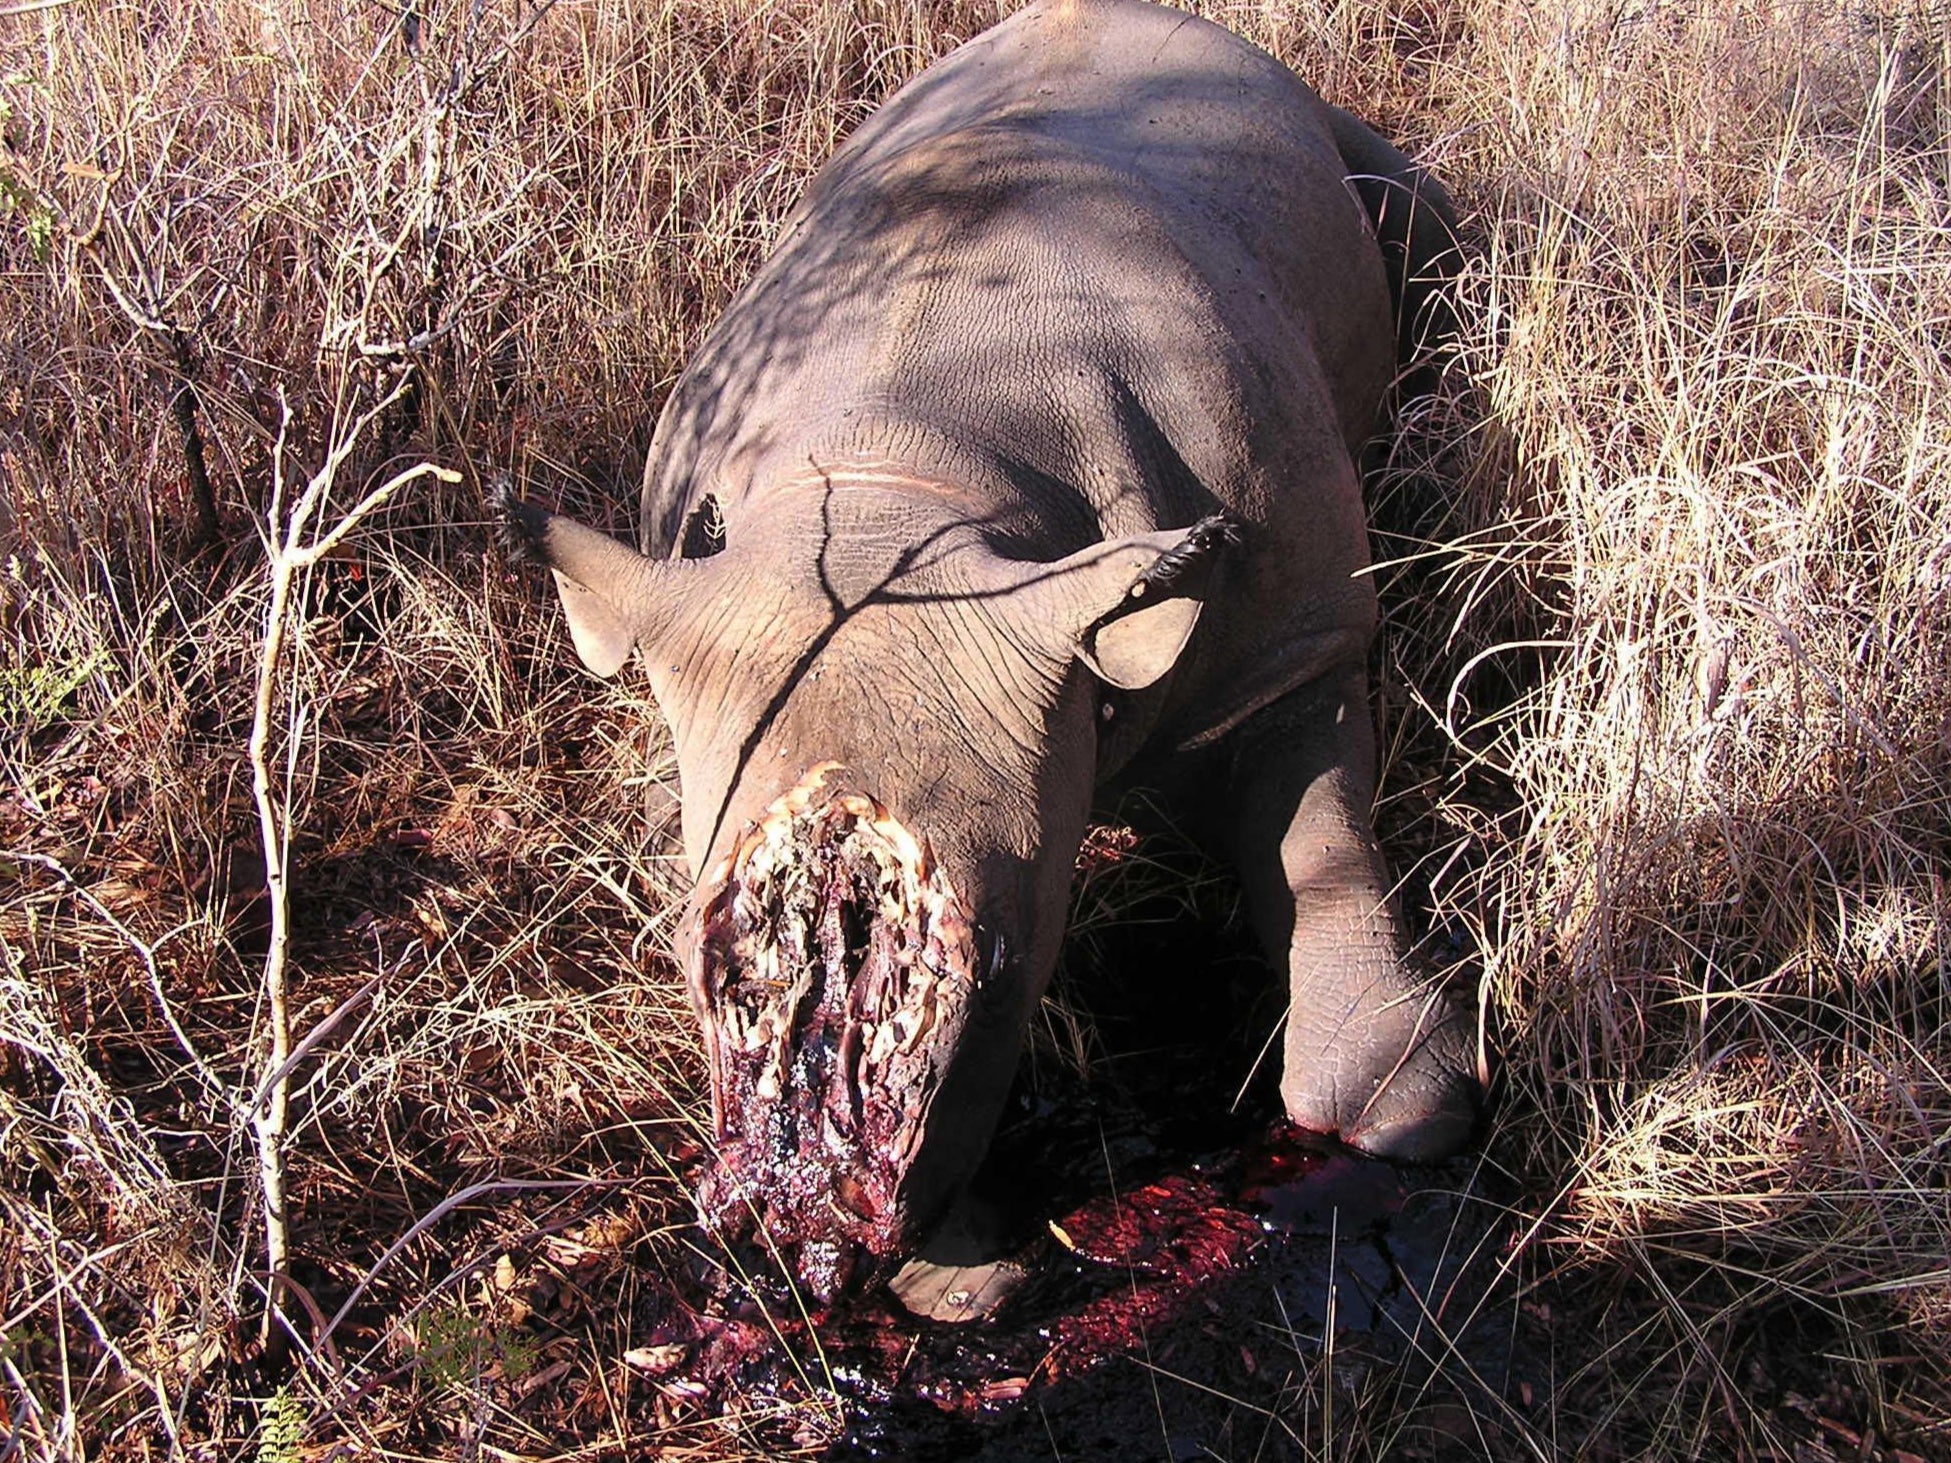 A poached rhino can be seen in Africa